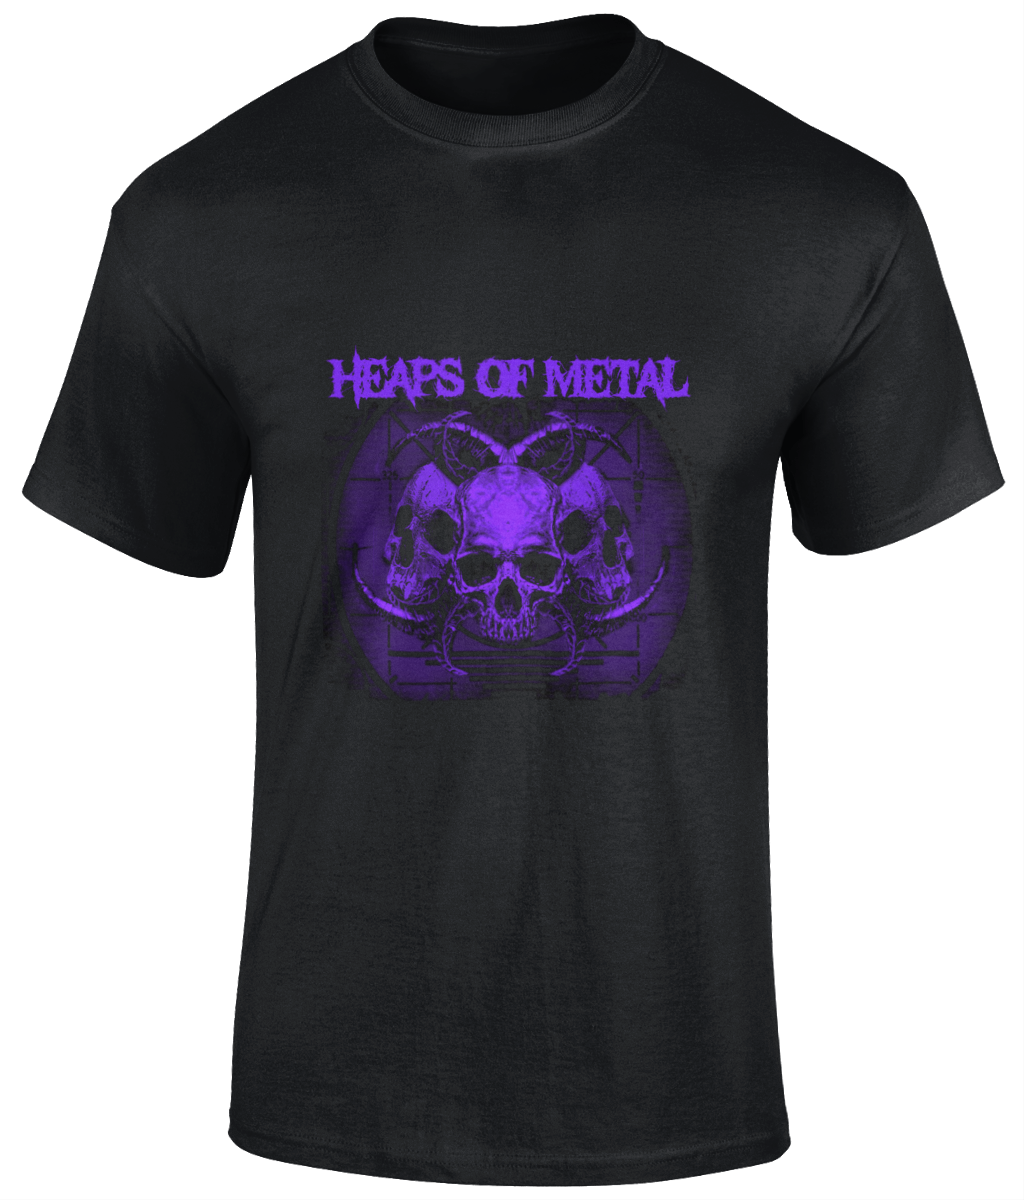 POISON VALLEY CLOTHING "HEAPS OF METAL ARTWORK" in purple on black unisex t shirt  Material: 100% cotton.  Seamless twin needle collar. Taped neck and shoulders. Tubular body. Twin needle sleeves and hem. Sizes small to 5XL